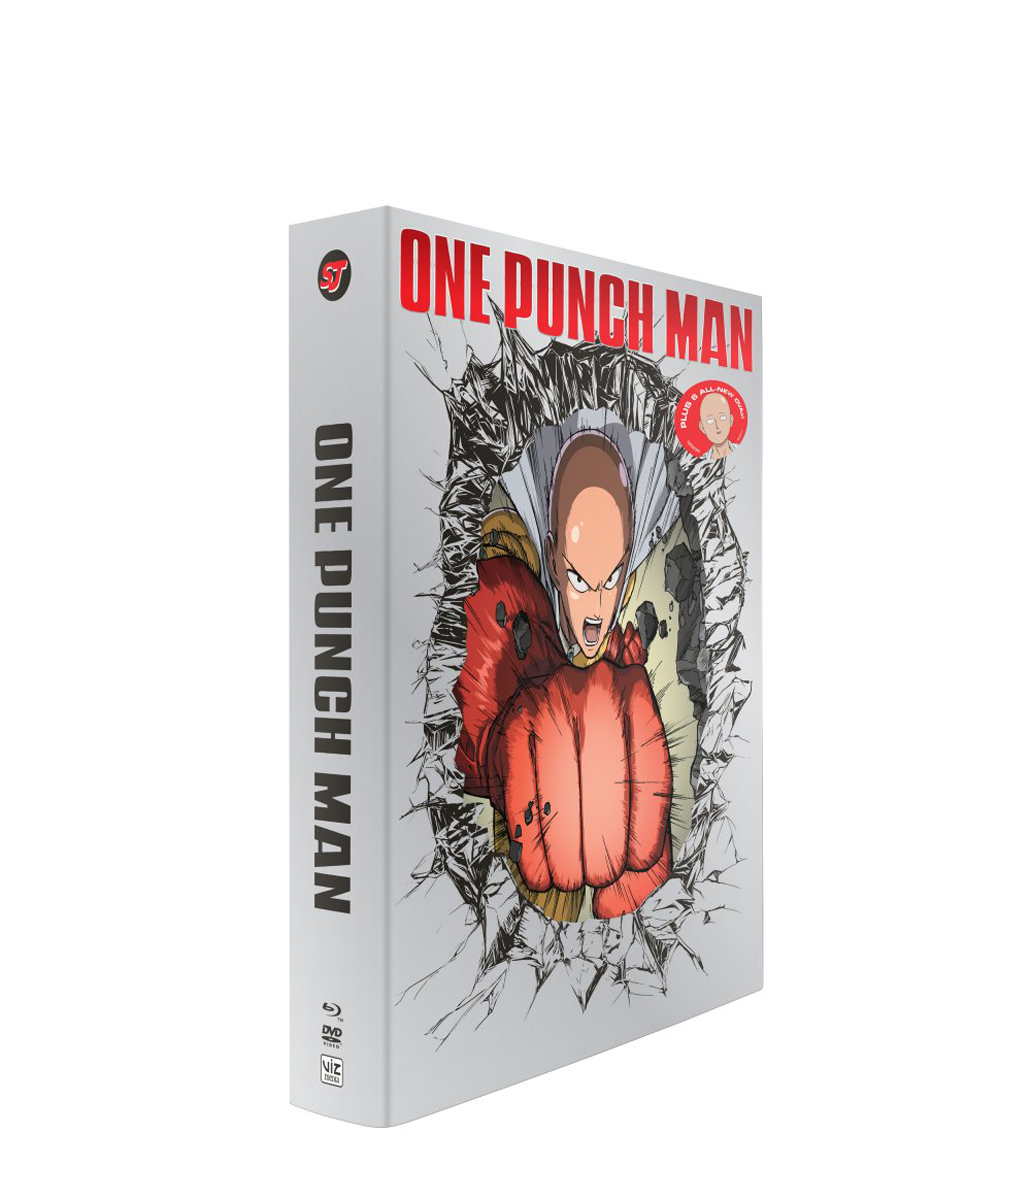 One-Punch Man Season 1 Limited Edition Blu-ray/DVD image count 2